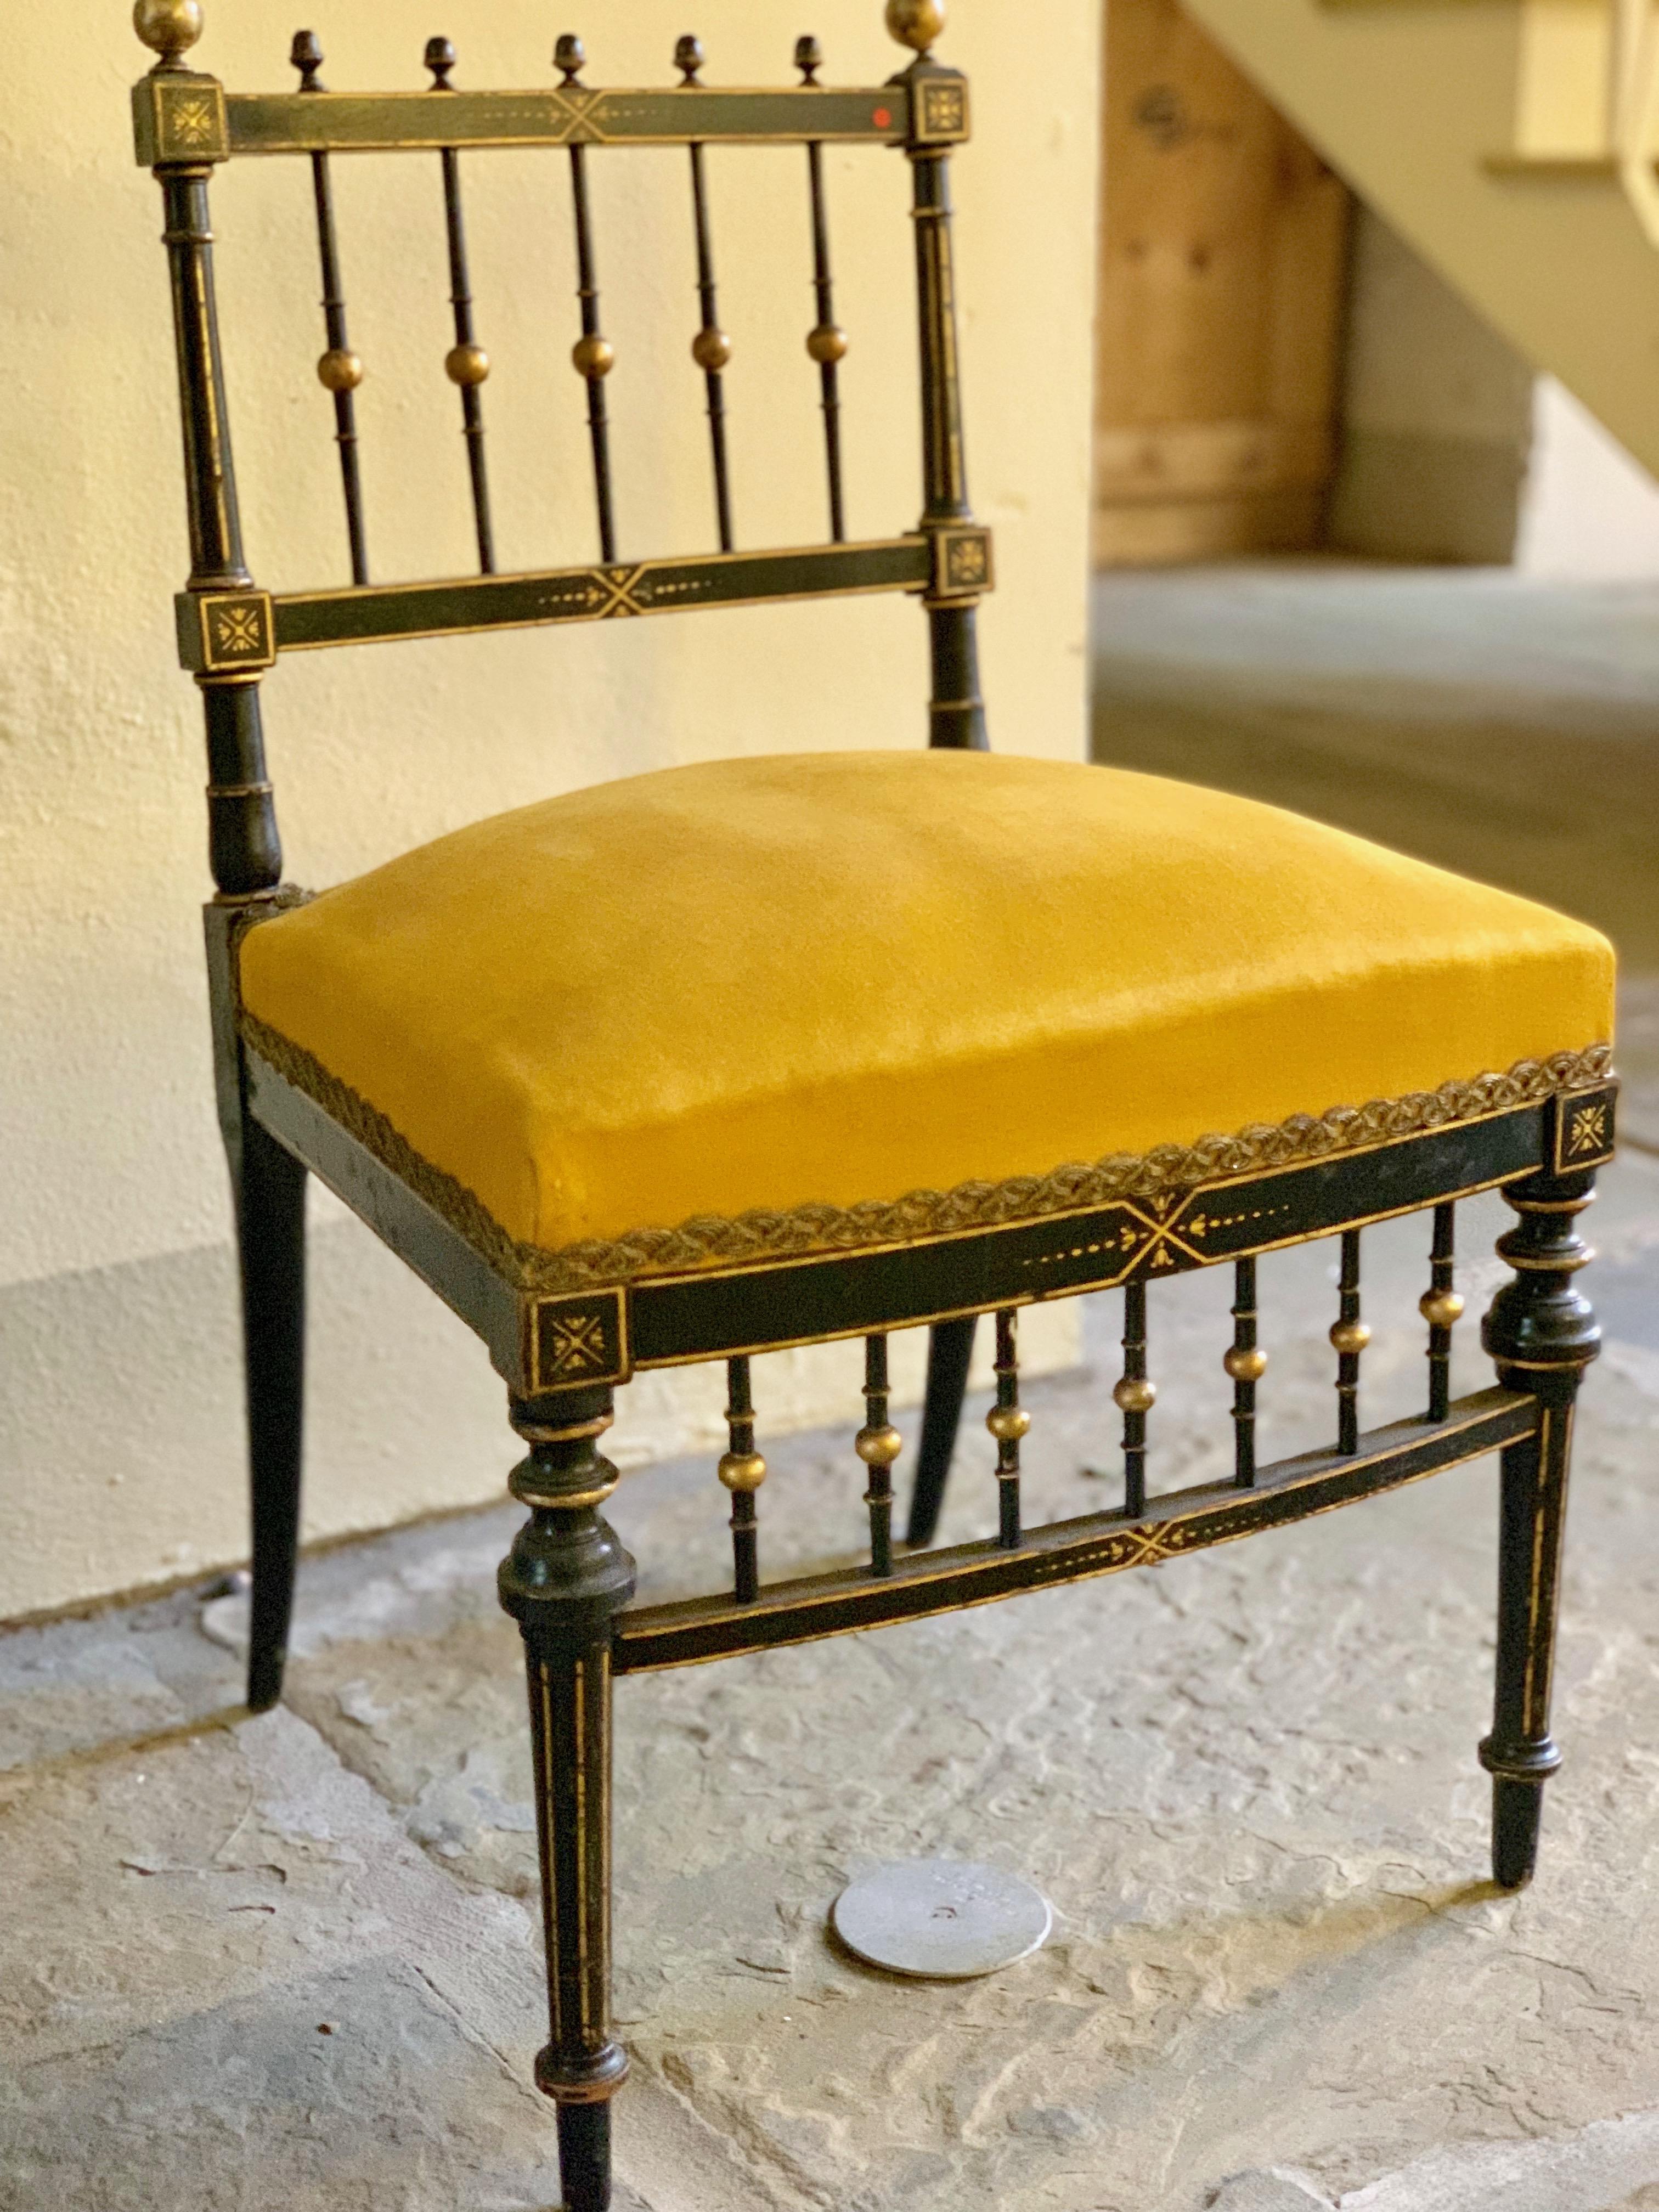 A French chair created circa 1750 in the style of ornate art furniture. The wood is ebonized fruitwood with gilded accents. The legs are tapered and turned, finished with giltwood accents. The golden cushion is finished with embroidered trim,